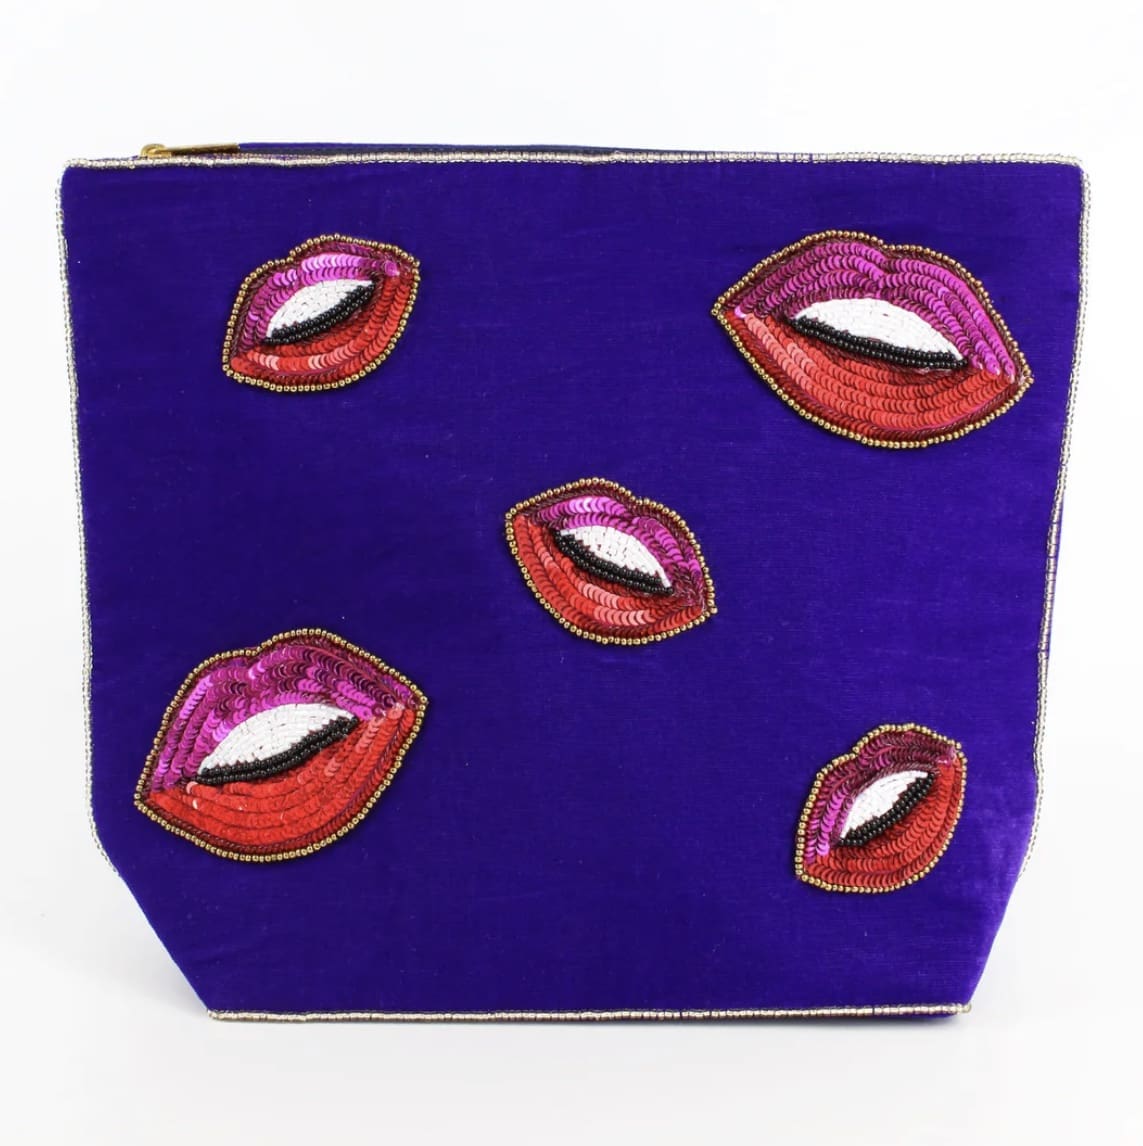 A purple cosmetic bag with lips on it.